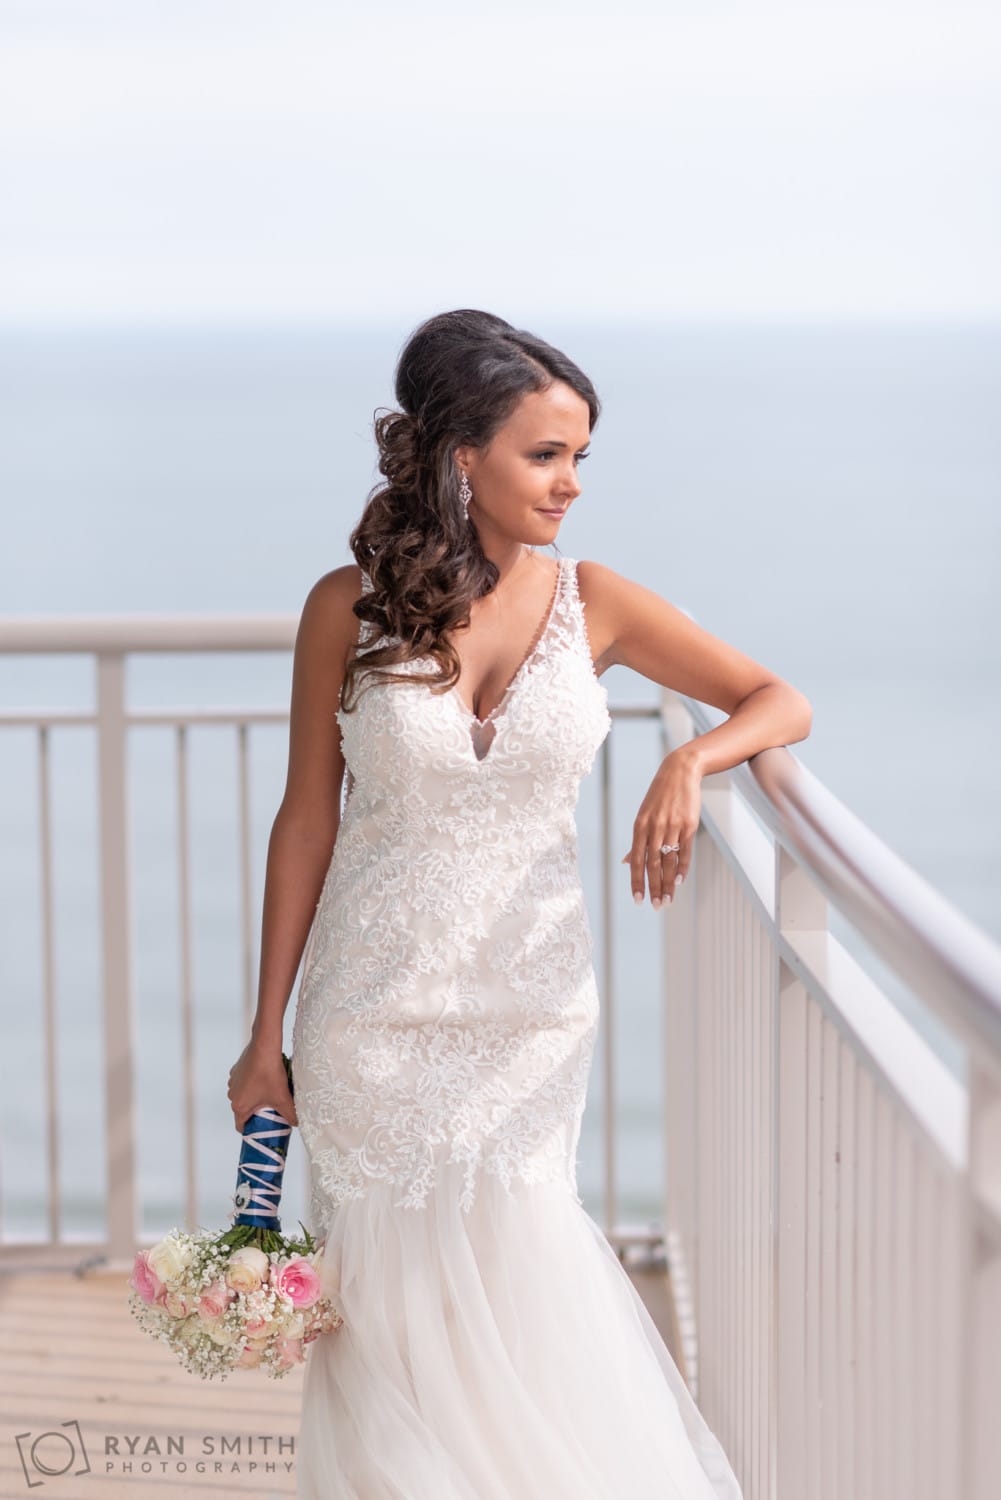 Bride looking out over the balcony - Avista Resort - North Myrtle Beach